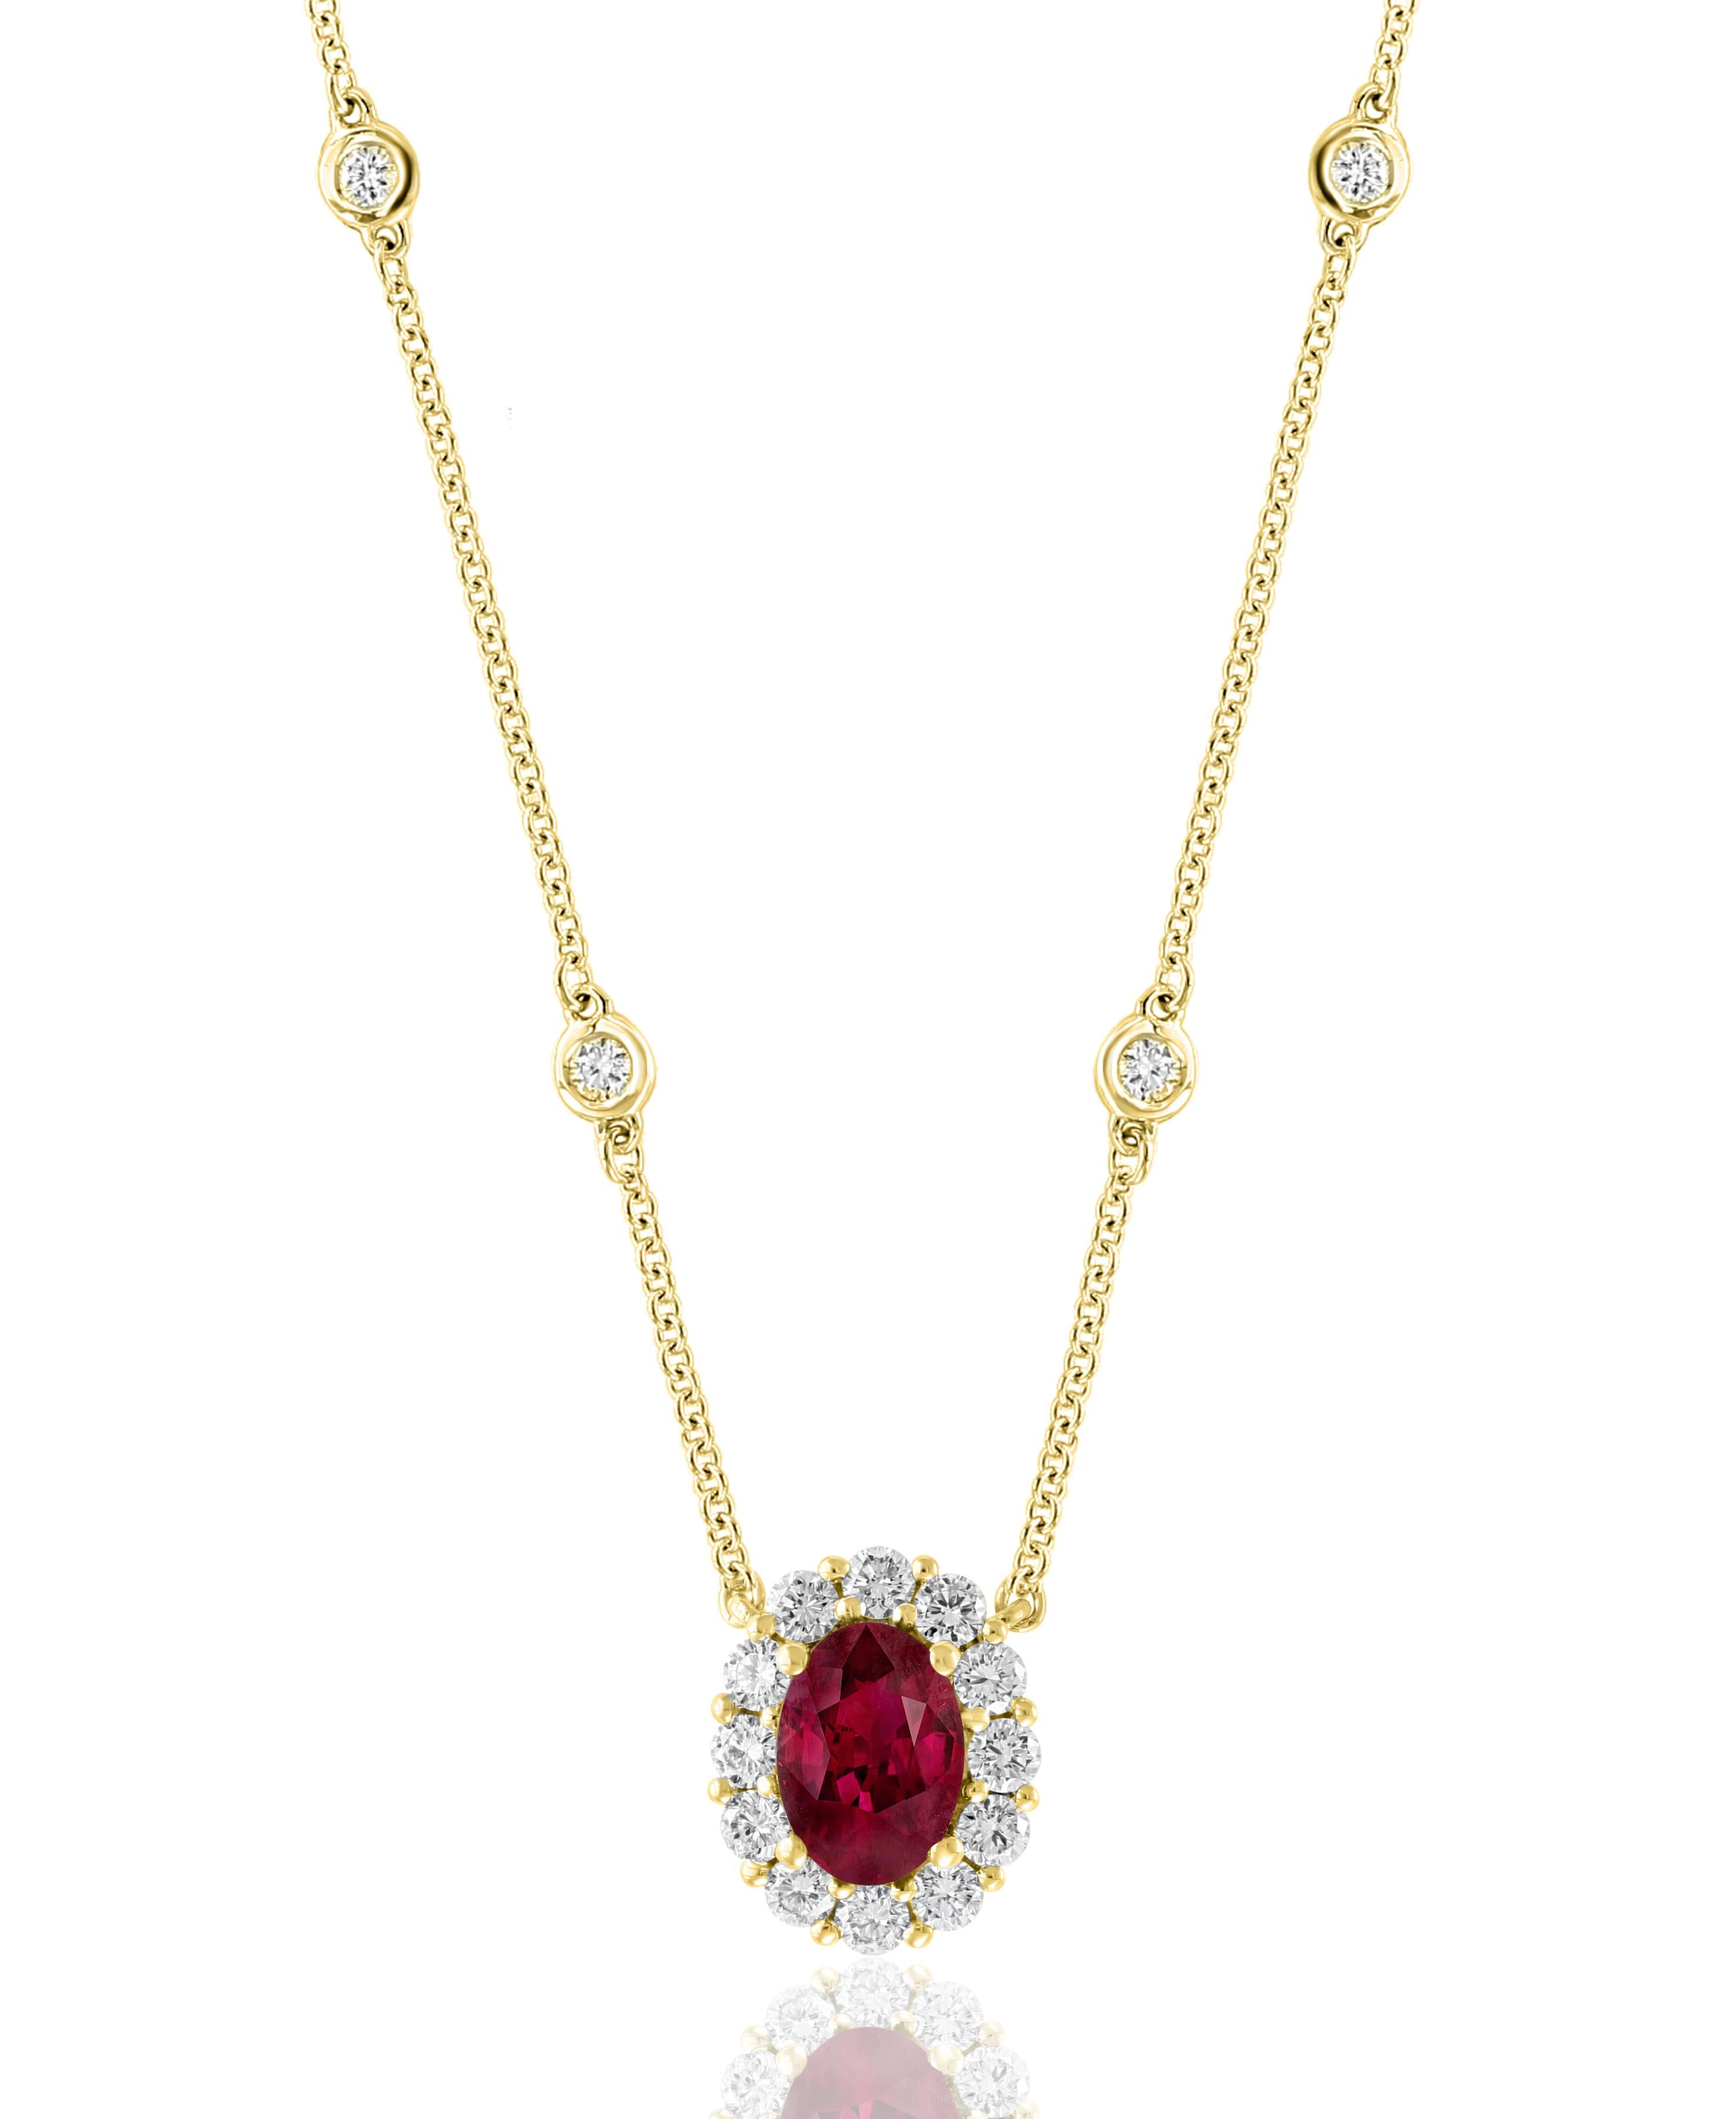 A fashionable pendant necklace showcasing a 0.71-carat oval cut ruby. The center stone is surrounded by a row of 16 brilliant-cut round diamonds weighing 0.48 carats in total. Made in 14k yellow gold. Comes with a gold chain accented with bezel-set